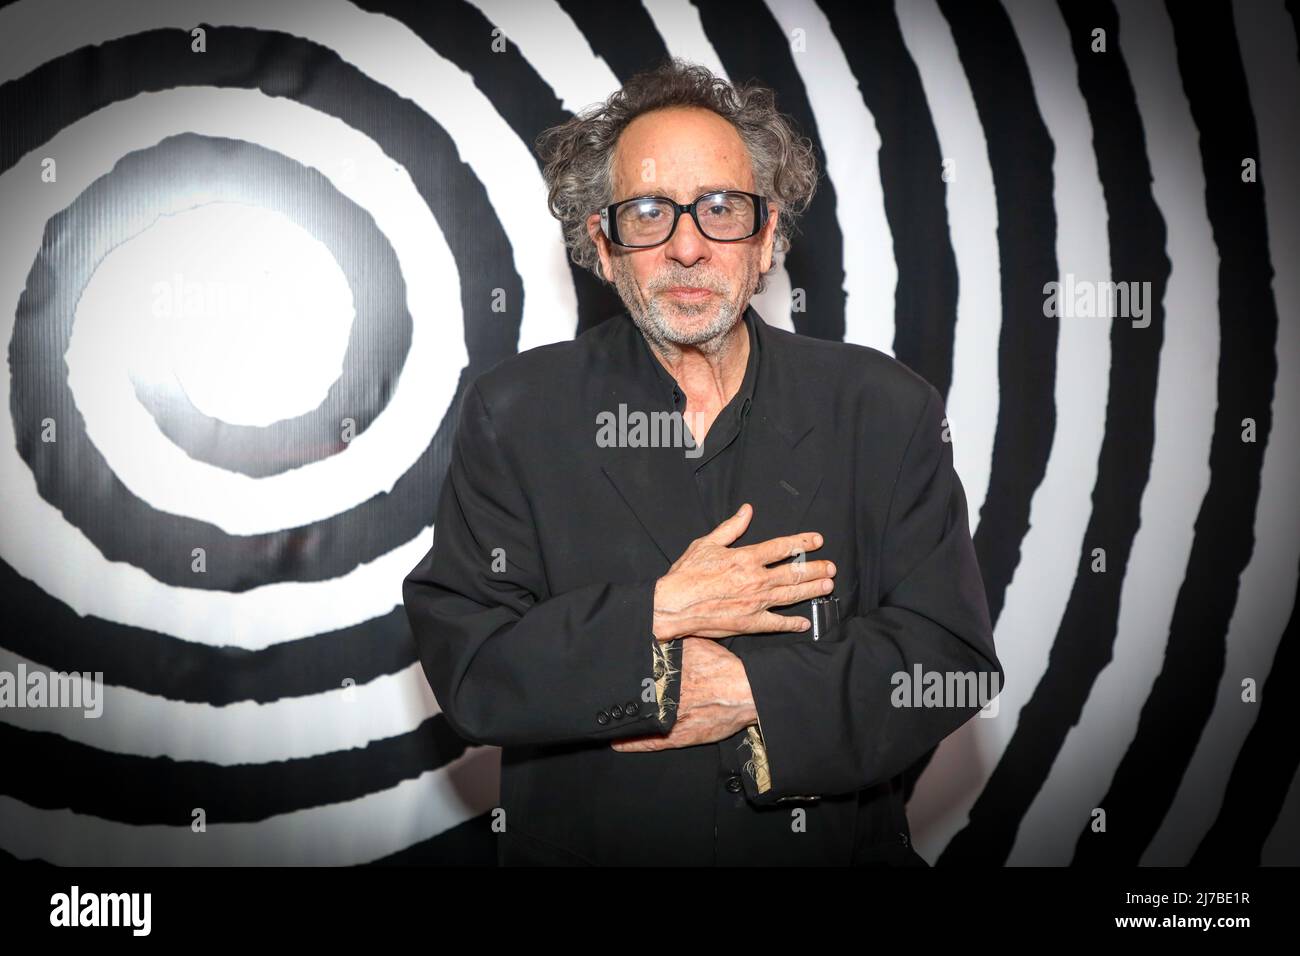 Sao Paulo, Brazil. 07th May, 2022. Tim Burton during the opening of his  exhibition "A Beleza Sombria dos Monstros" which brings together  illustrations and paintings by the filmmaker at Oca do Ibirapuera